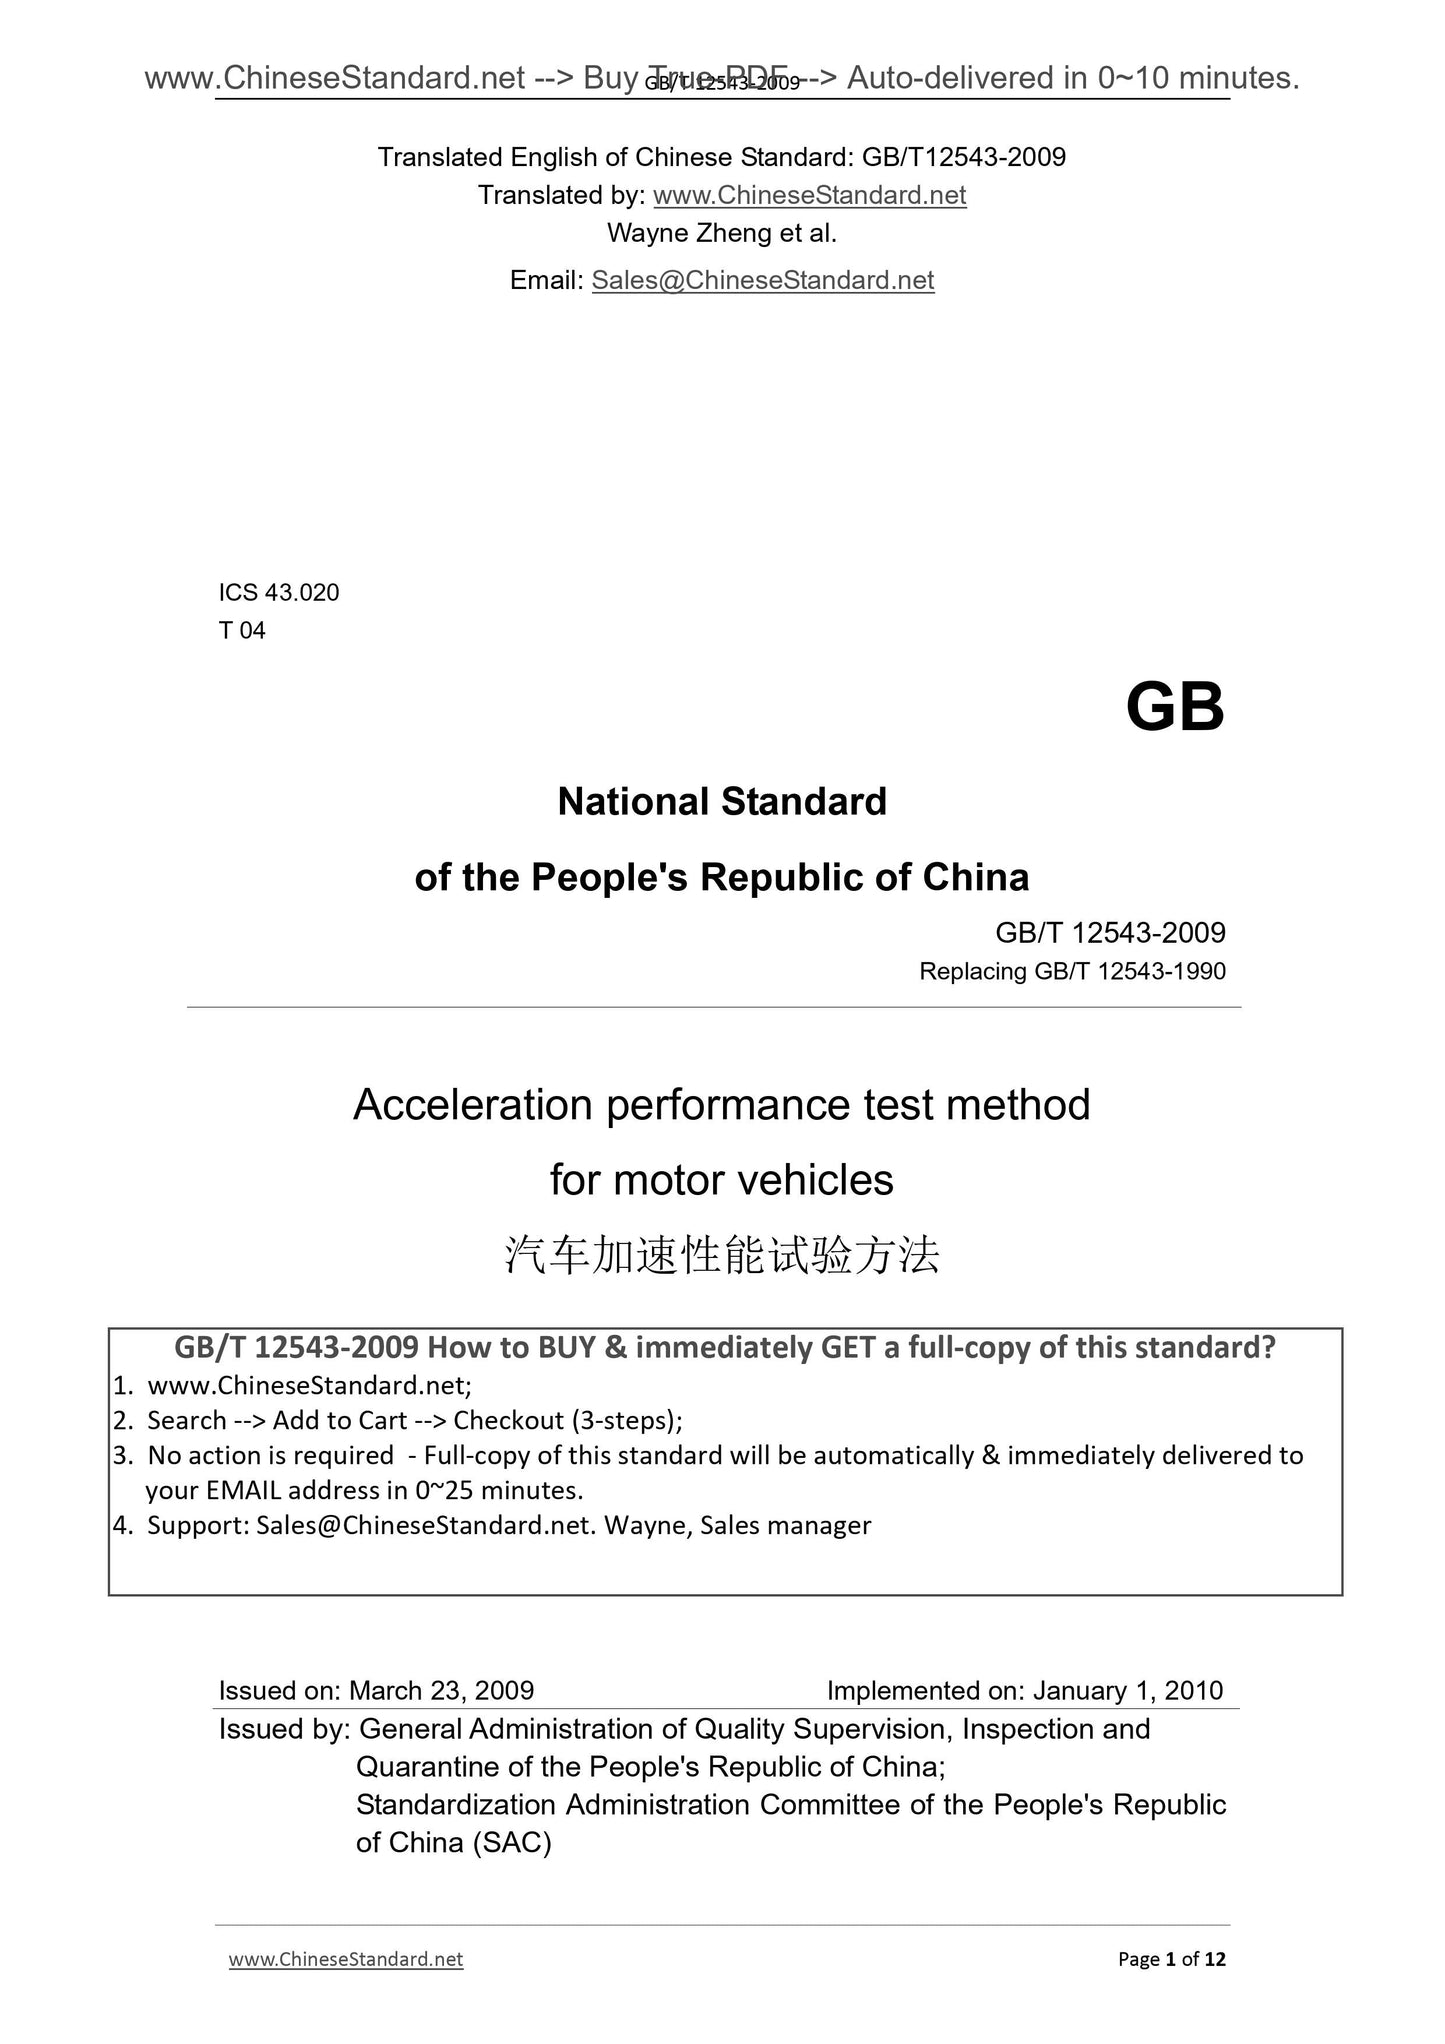 GB/T 12543-2009 Page 1